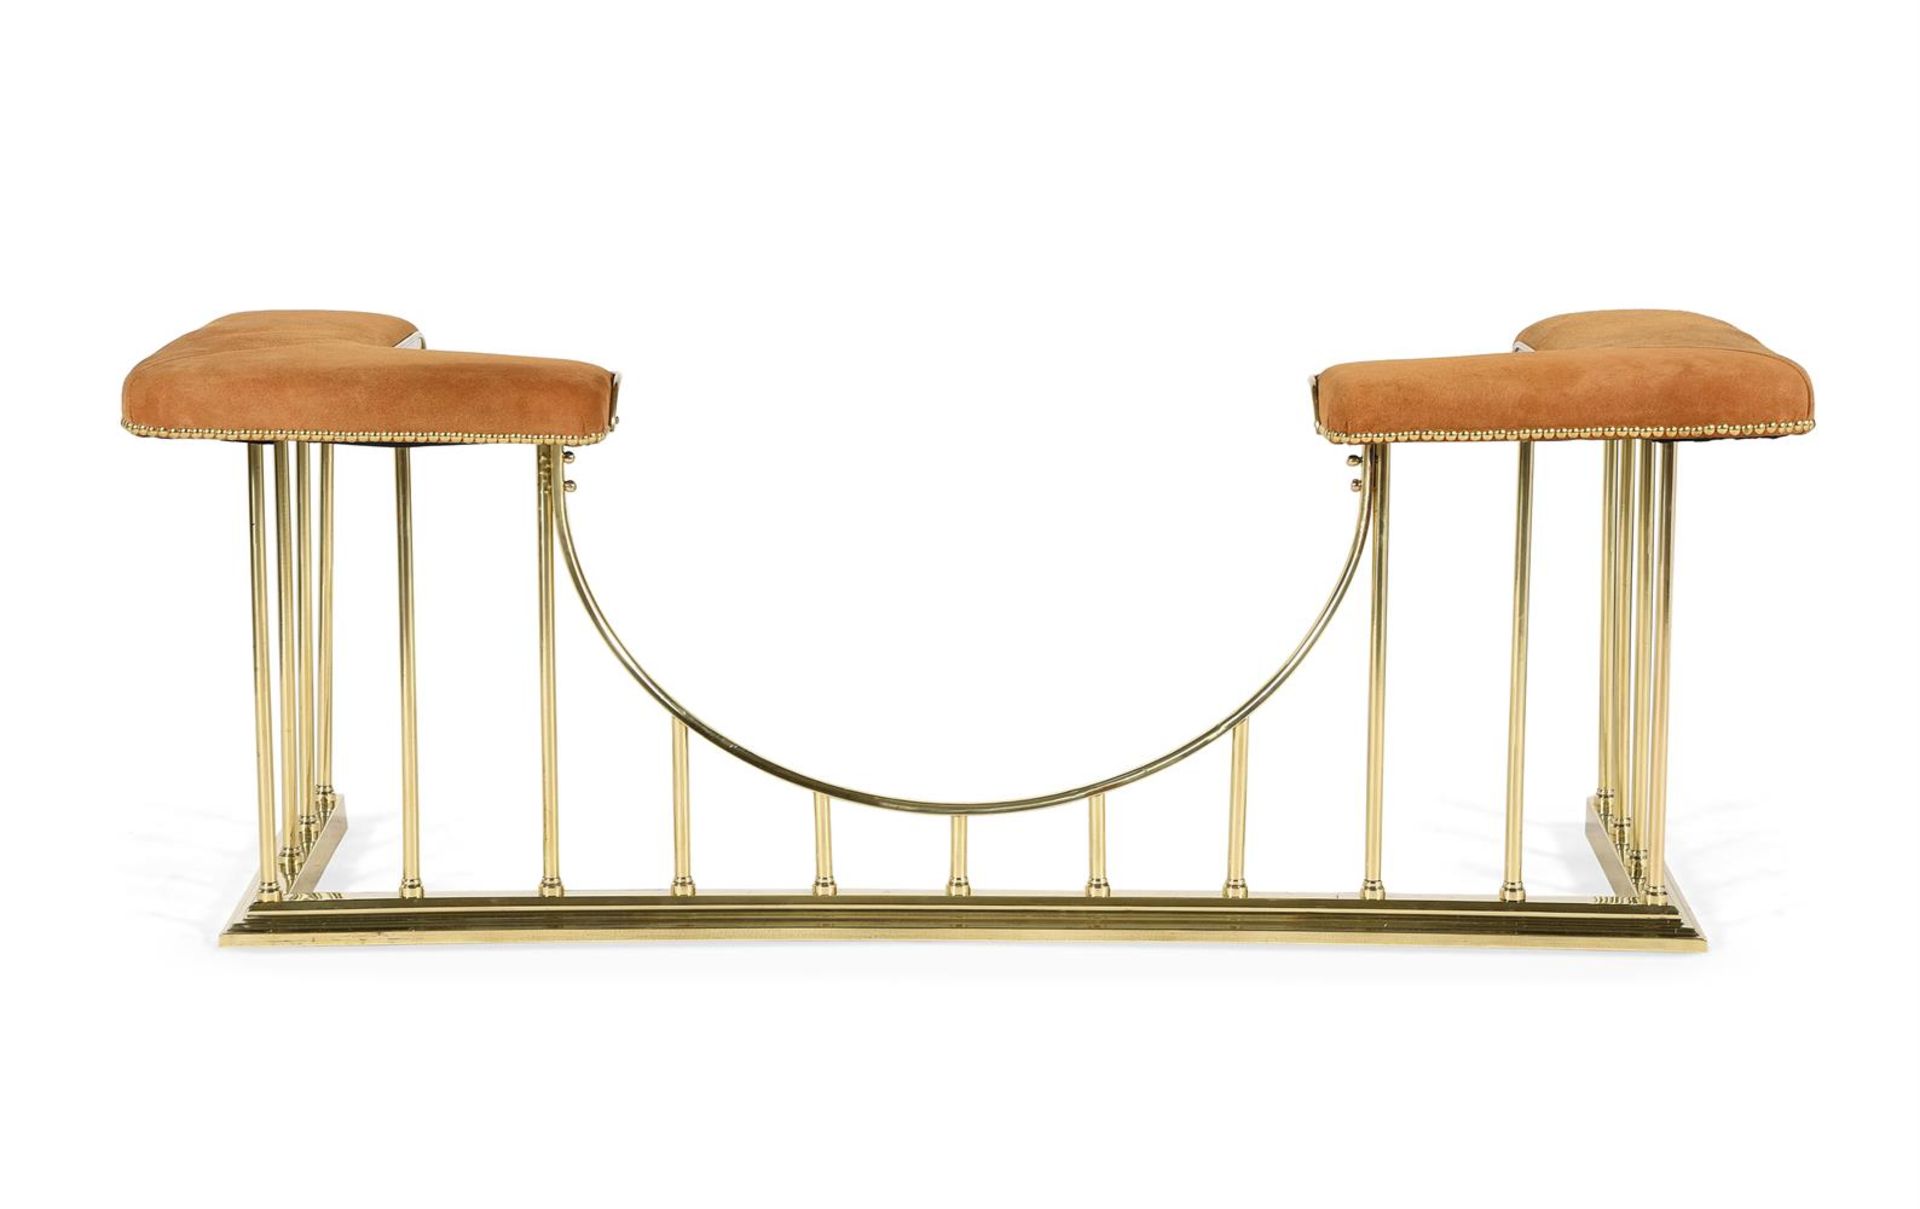 A VICTORIAN GILT BRASS AND SUEDE UPHOLSTERED CLUB FENDER, SECOND HALF 19TH CENTURY